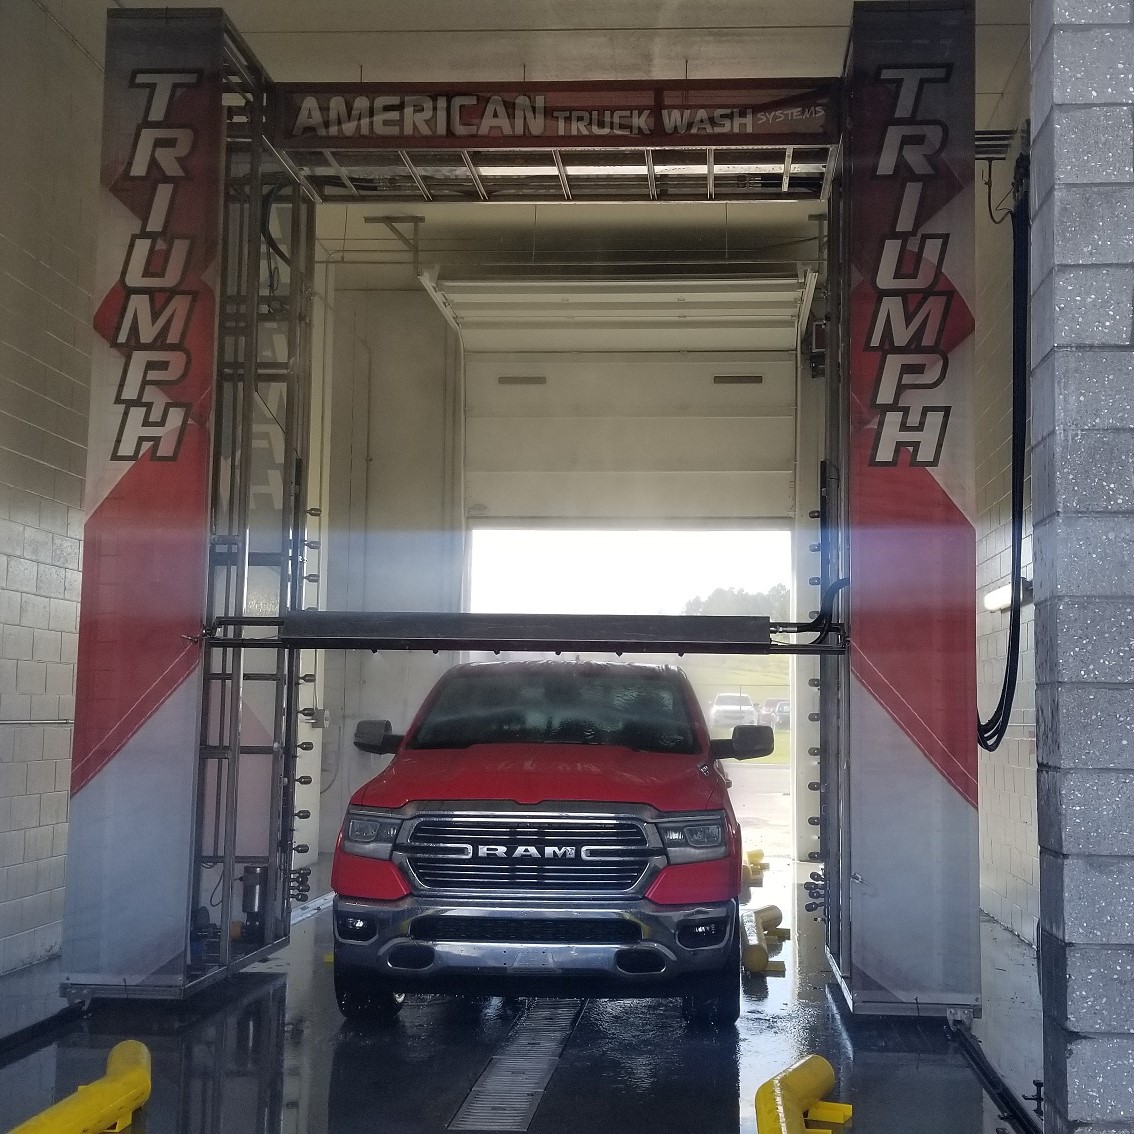 Pickup truck in a touchless gantry truck wash system